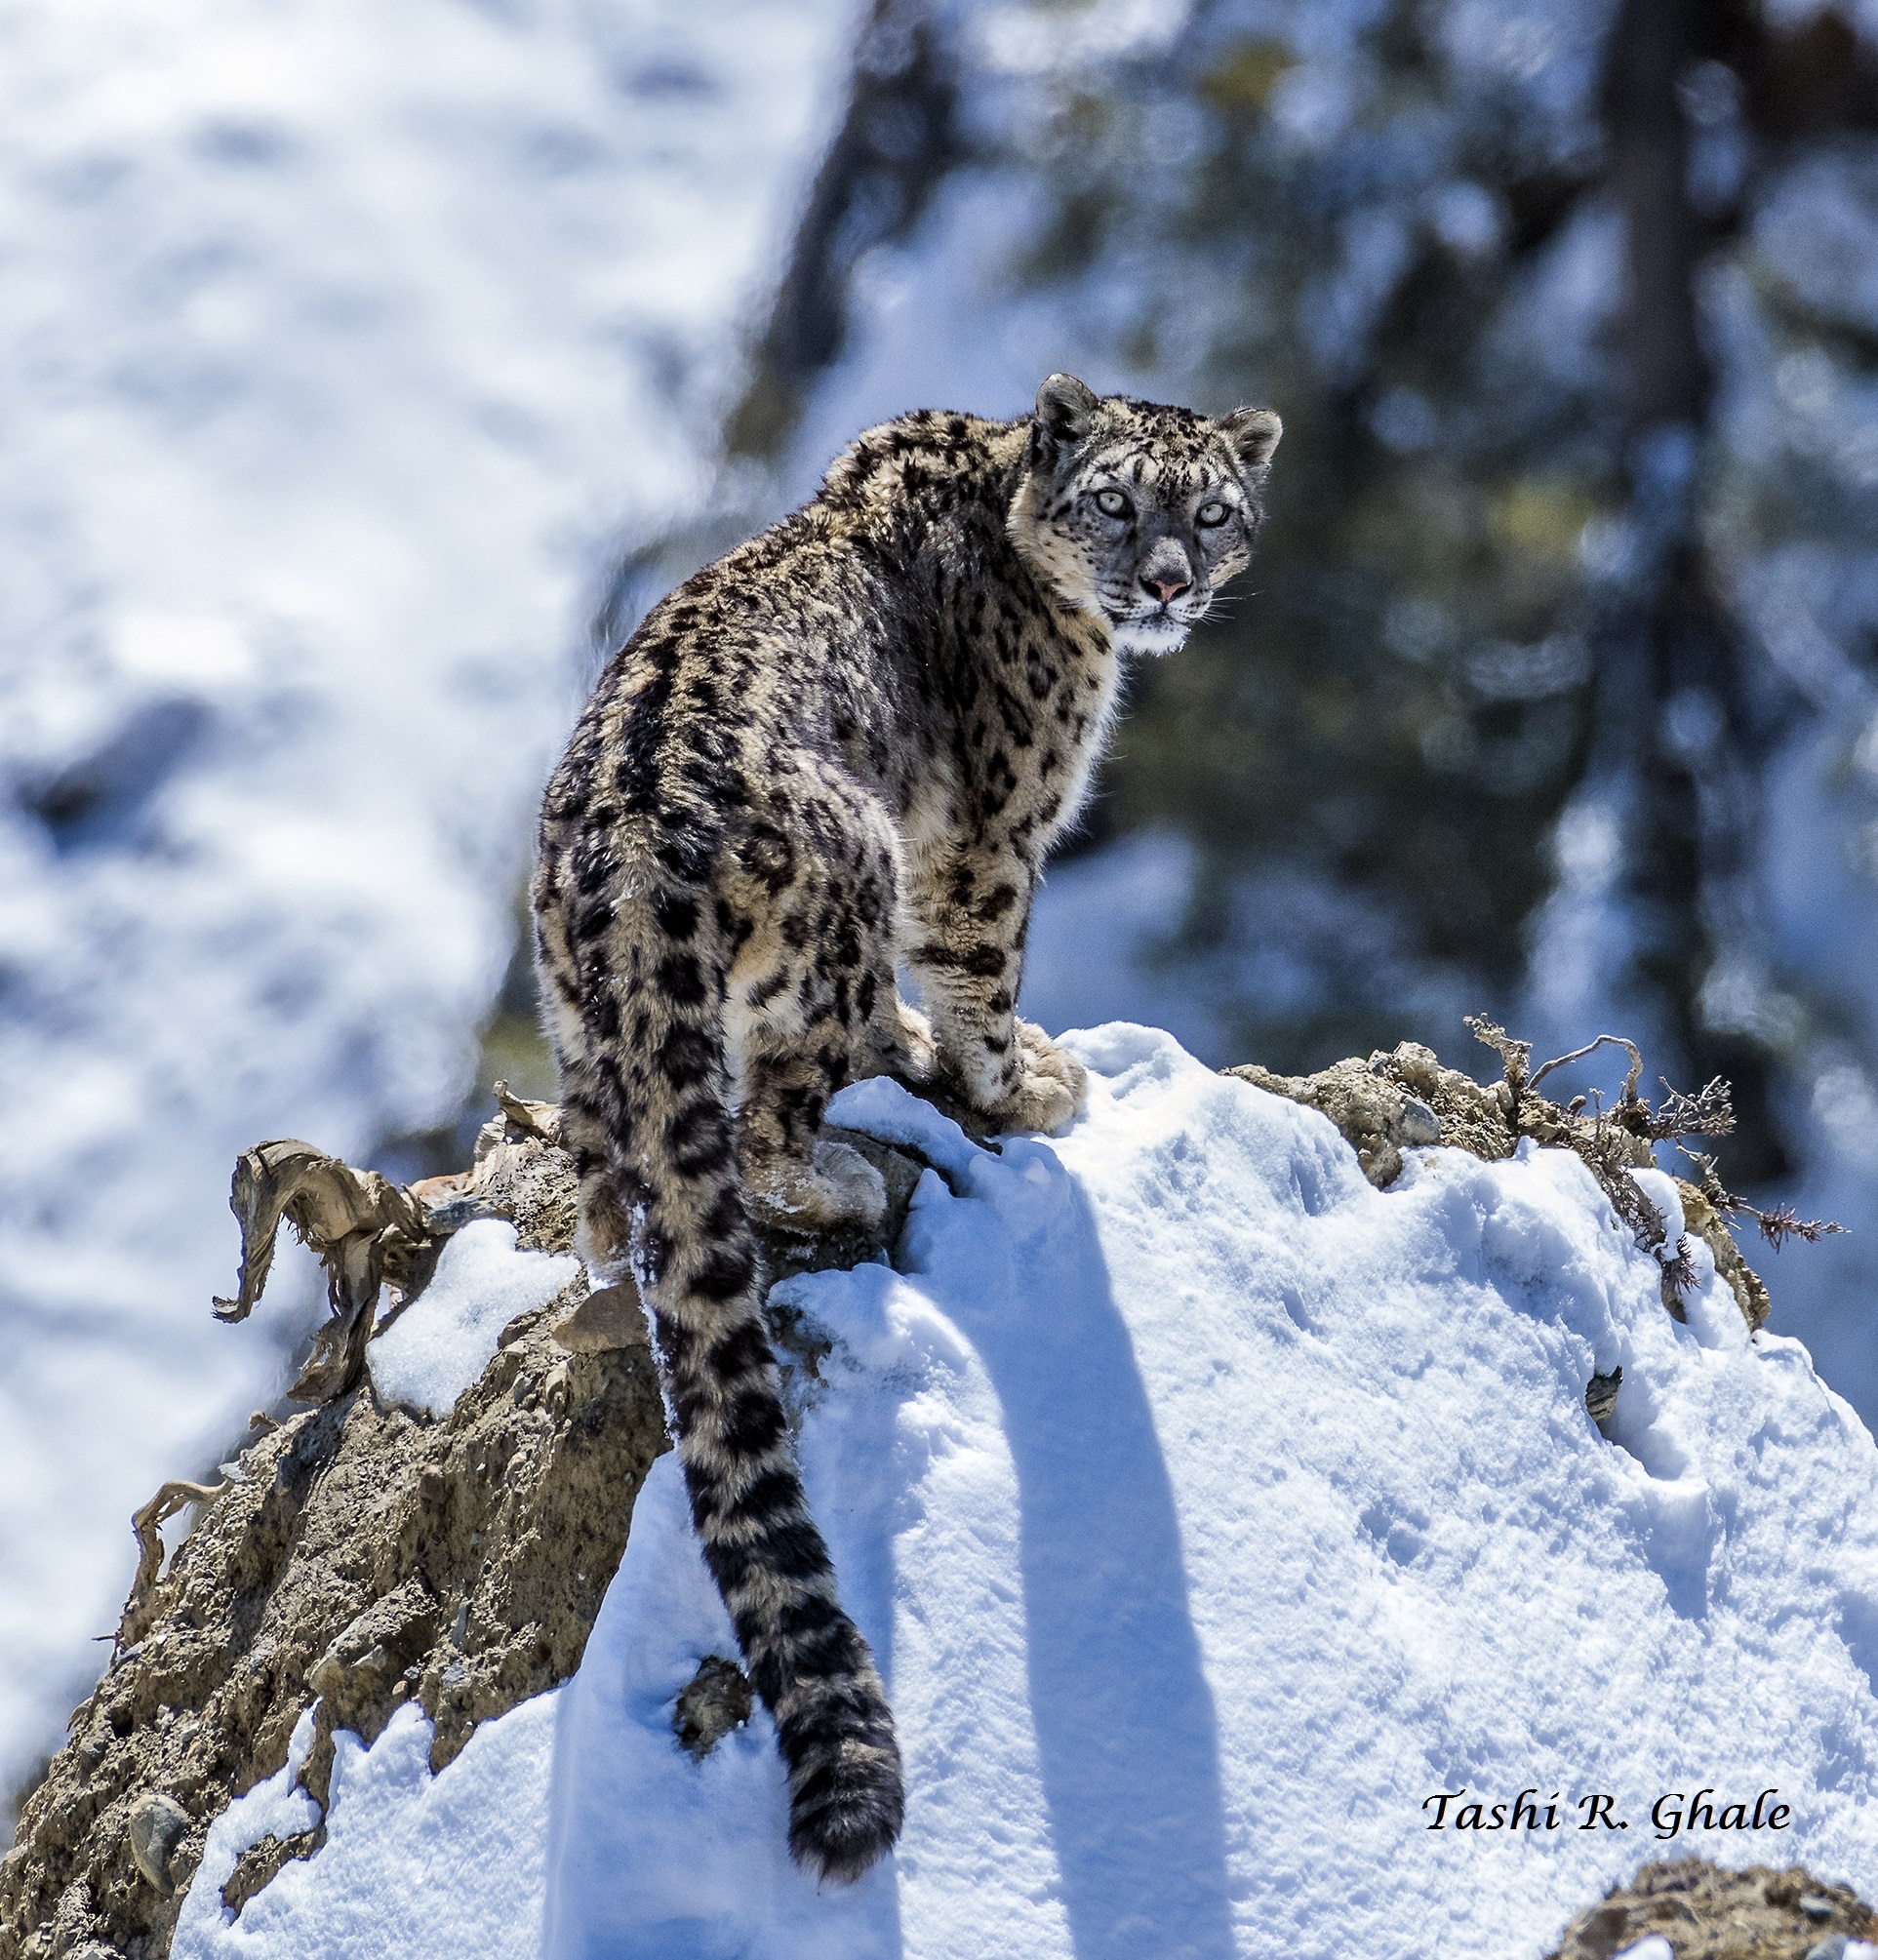 <a href="http://lowfareindia.com/tour/himachal-snow-leopard-expedition-unveiling-the-mysteries-of-the-himalayas/" target="_blank" style="color: #61CE70;">Snow Leopard!</a>